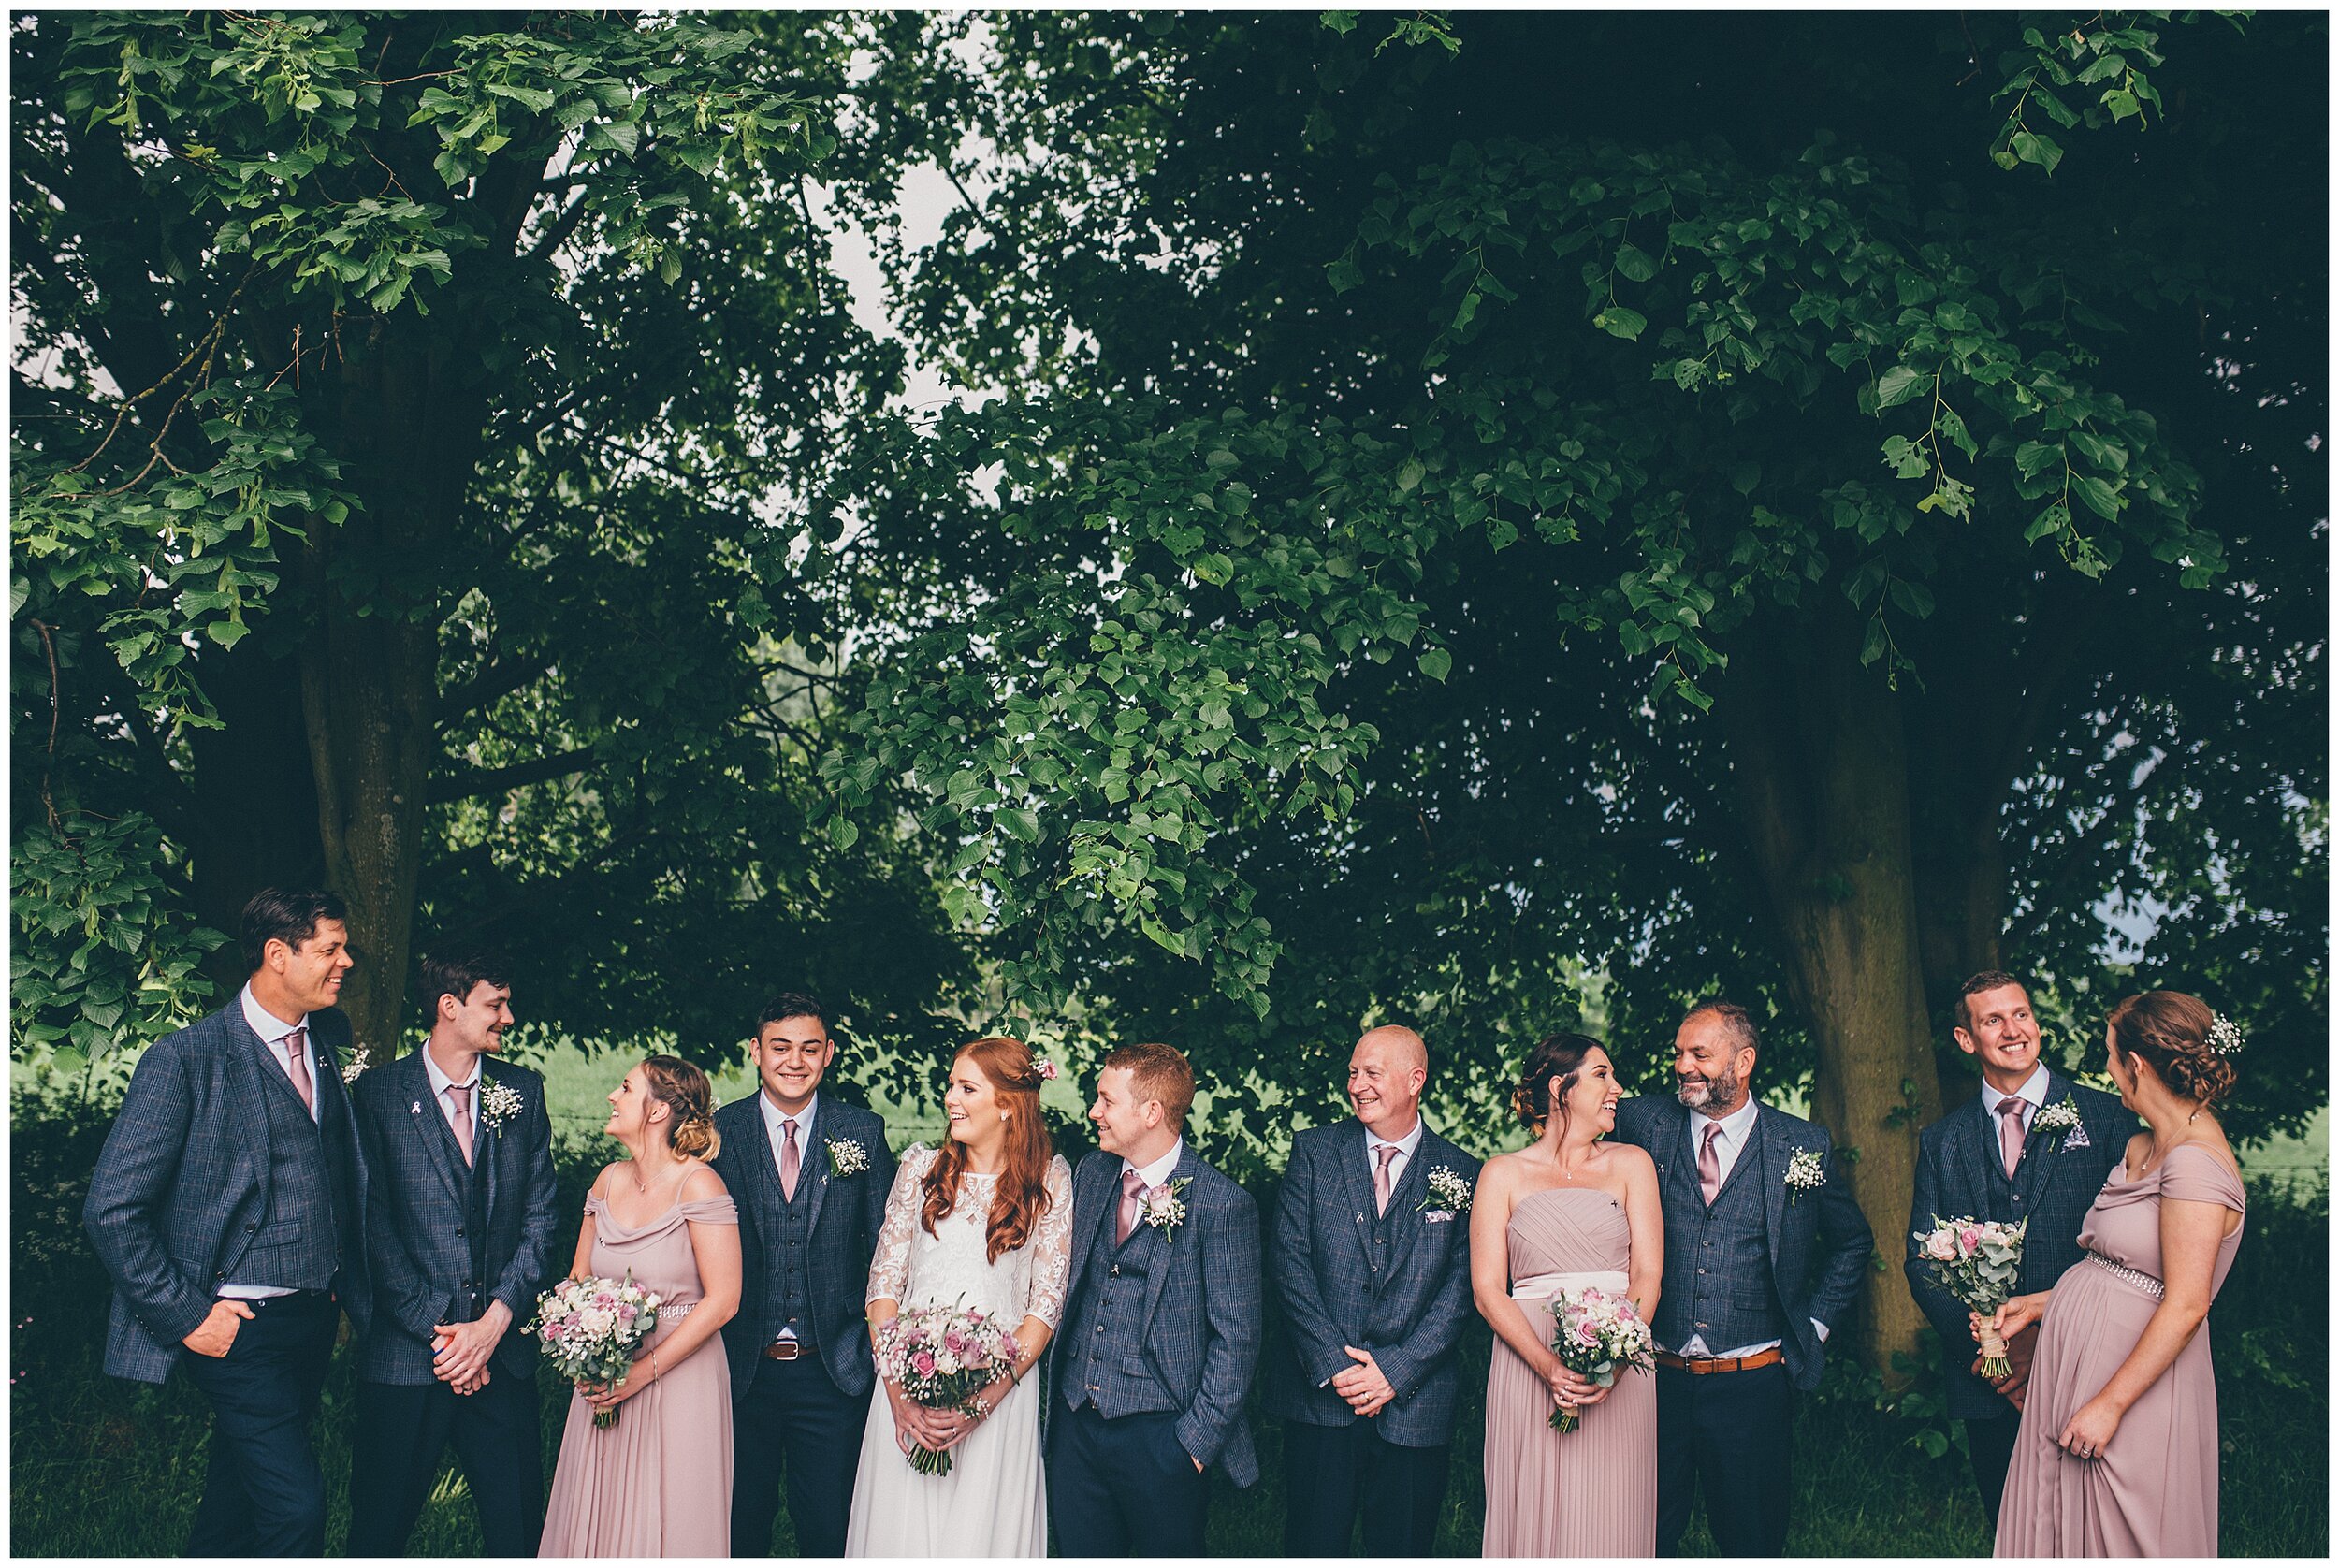 Bride and groom and their bridal party all together during summertime wedding.